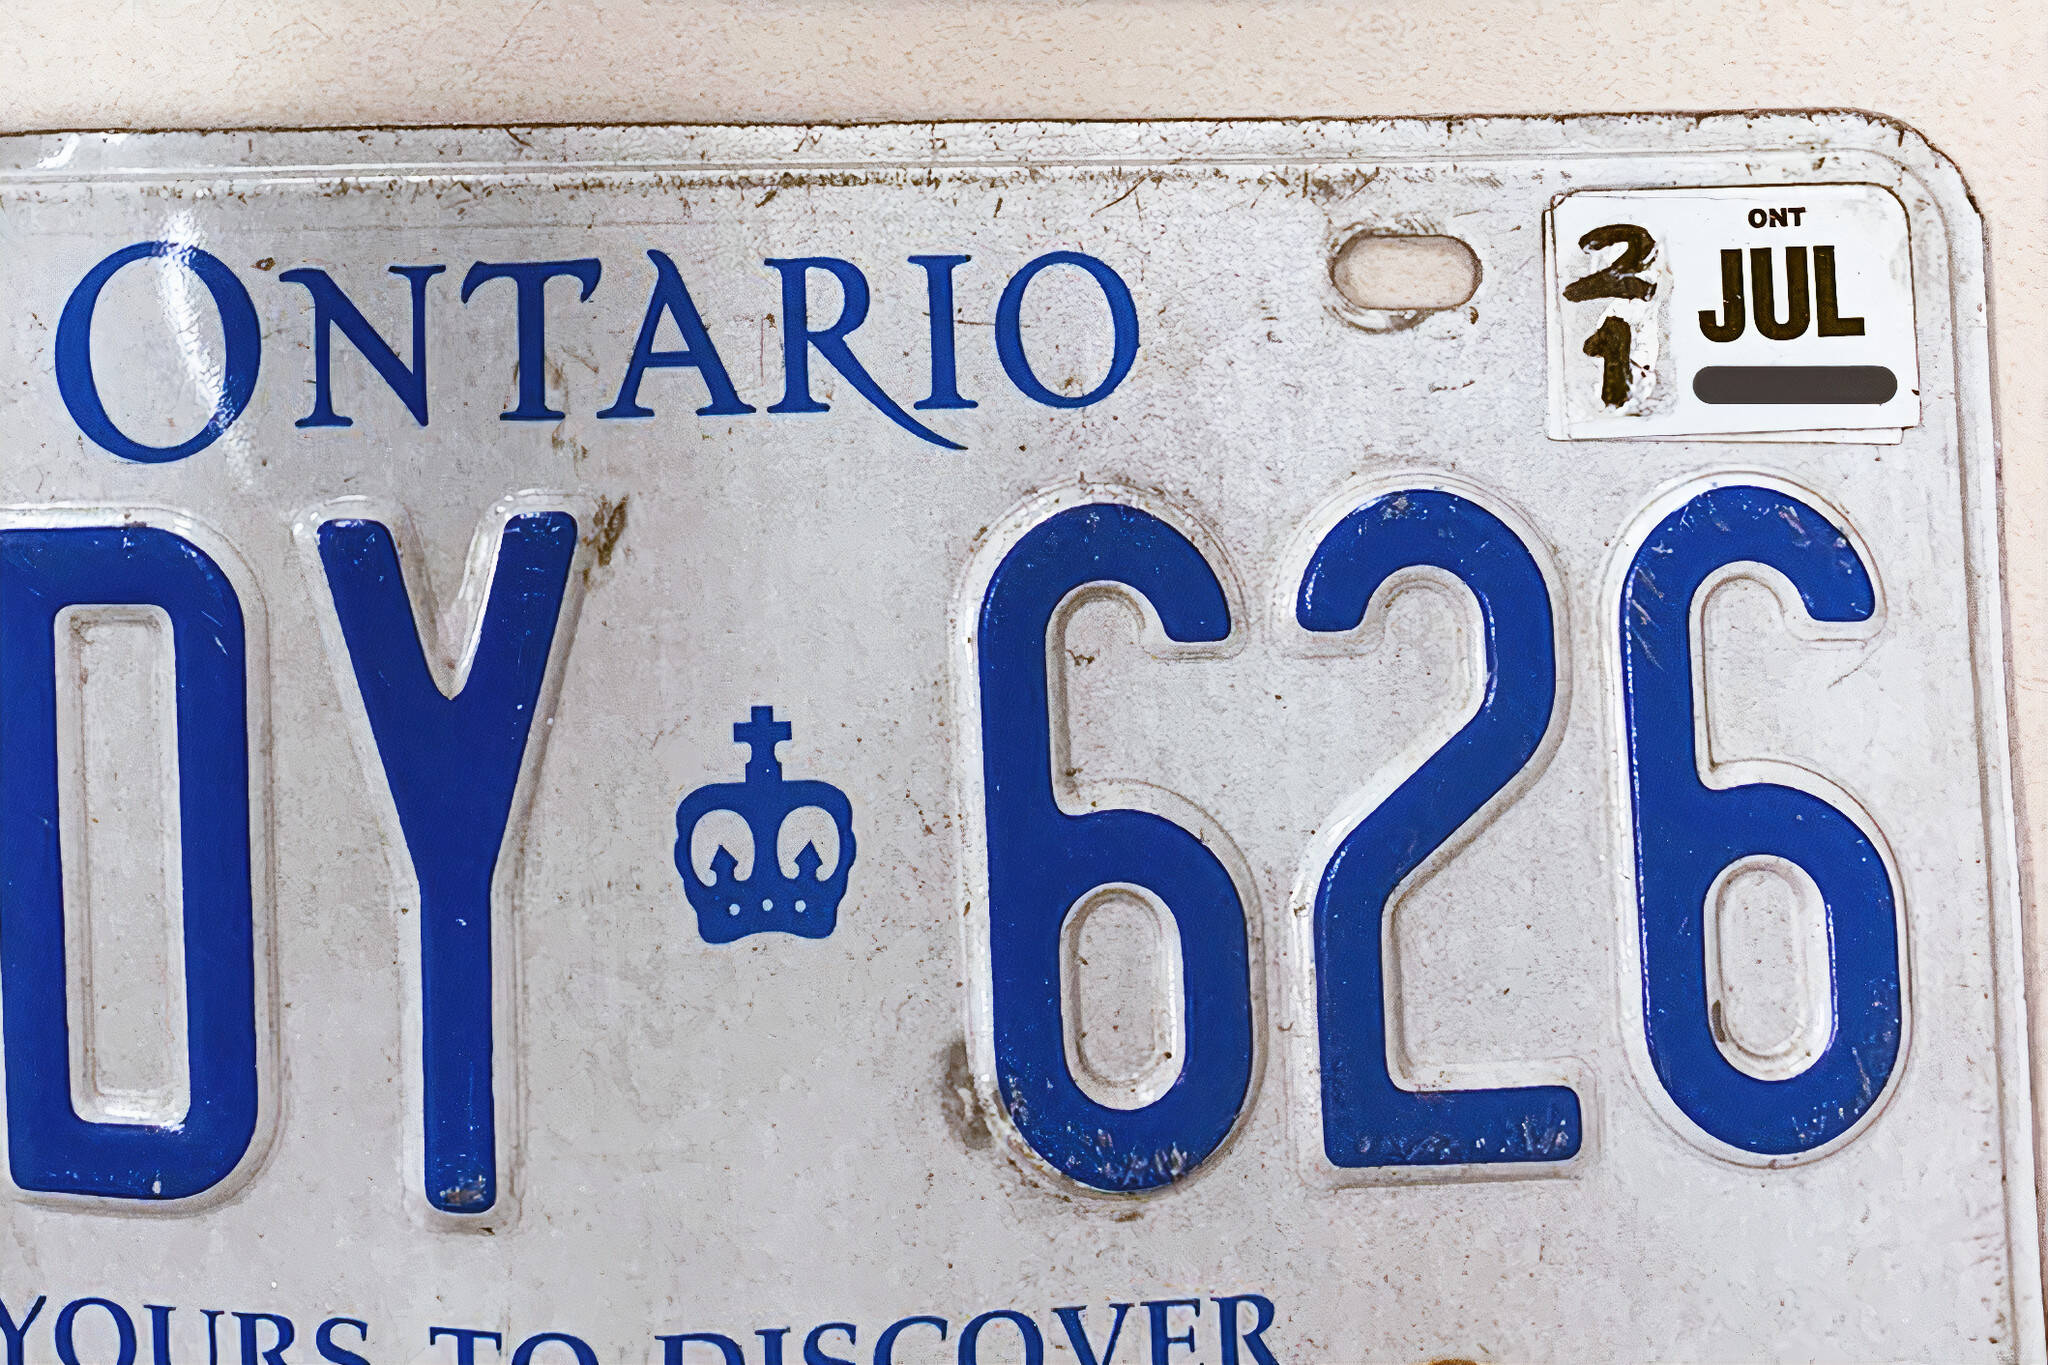 Toronto driver busted after using marker to draw new expiry date on licence plate